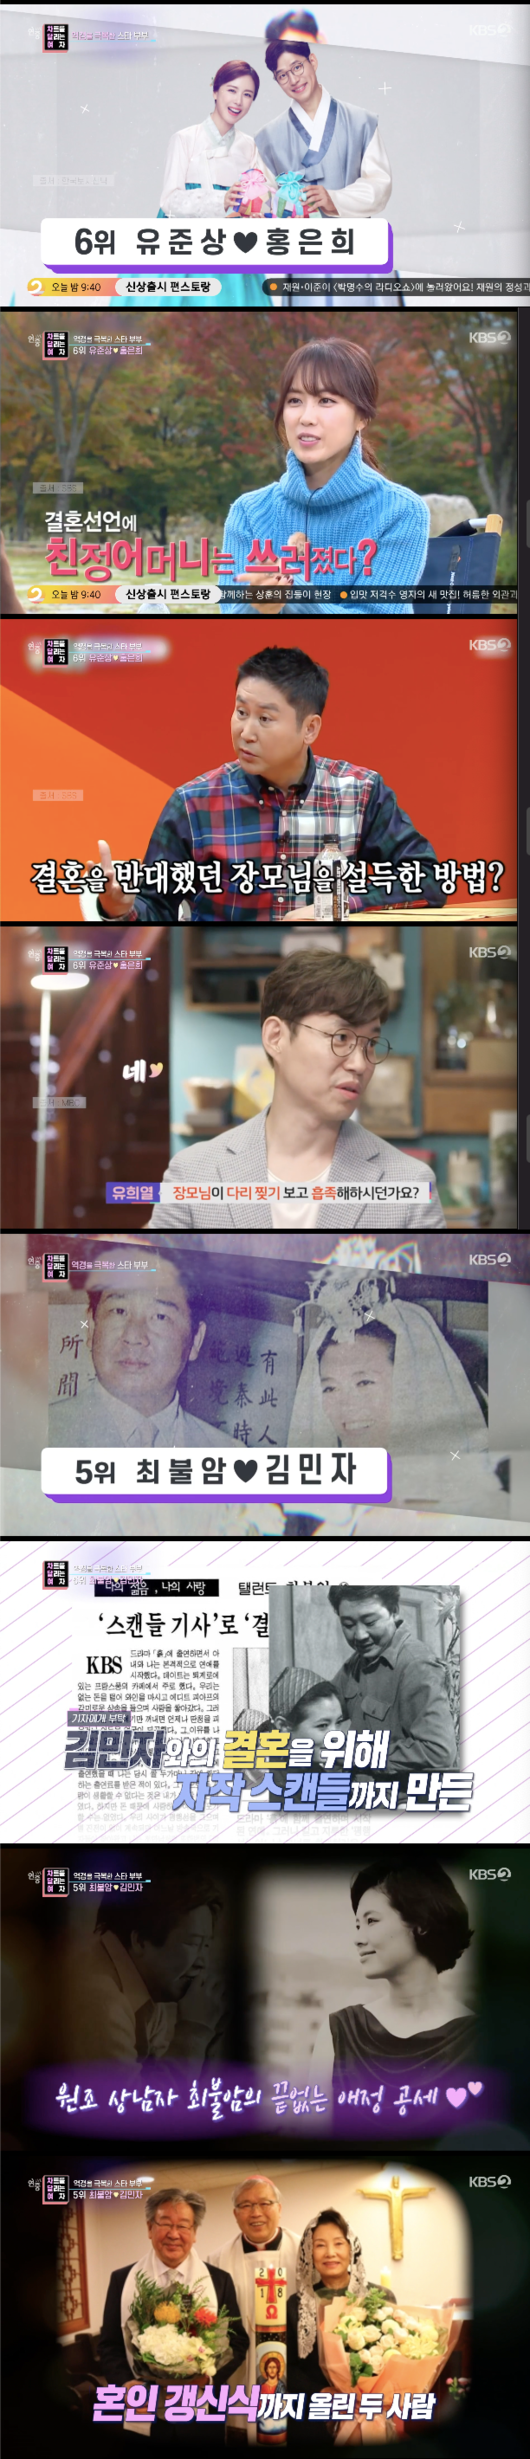 Entertainment Weekly Love Live! The marriage story of Jang Youngran and the oriental medicine doctor was released.On the 24th, KBS 2TV Entertainment Weekly Love Live! The woman running the corner chart released The 2nd Star Couple Overcoming Adversity.Sixth was the Yoo Jun-sang, Hong Eun Hee couple; Yoo Jun-sang fell in love with the airline model Hong Eun Hee at first sight.In 2003, they overcame the age difference of 11 years old and raised the marriage ceremony in verse 3.1.Im going to marriage the day that Yoo Jun-sang came home to be allowed to socialize, Hong Eun Hee said. It was only a month after the relationship.I heard it for the first time on the spot. My mother was very angry about it. Yoo Jun-sang even tore his legs to turn his mother-in-laws opposition to the age difference. He liked it a lot, he said.The fifth place was Choi Bull-am and Min-ja Kim. They marriage in 1970. Choi Bull-am said, I was poor.I didnt have a father and I was going to give my daughter to my wife because my only son and my job were entertainers.At that time, Min-ja Kim was the top actor who starred in various dramas, showing off his Western beauty, and Choi was an unknown actor.The people around me were all against it at the time, and my close friends were saying they wouldnt see it, Min-ja Kim said.In fourth place, BMK and Maxi Iglesias Larry Dirrell were among the top two.Husband, one of the two people who raised the marriage ceremony across the border in 2011, asked for the number with his first interest.The two did not speak well and Husbands job was also a big obstacle.Maxi Iglesias Larry Dirrell was a USFK member of the United States of Americas leading military helicopter Black Hawk, from Pilot, when he was in Korea.BMK said in a broadcast, When I was a year old, I was dispatched to United States of America after my station in Korea.On the day I went back to United States of America, Husband burst into tears that he had endured.Eventually, Husband gave up his Pilot job and raised BMK and marriage.Third place was Jang Youngran and a Chinese medicine doctor Husband. They started their love through an entertainment program in 2008.However, the marriage process was not smooth, but Jang Youngran said, I was opposed because of the broadcasting characters such as unfavorable and plastic beauty.In the middle of the day, Jang Youngran and Marriage had a superpower, and he said, It is too hard not to give my parents marriage. I can not live. I will die.Eventually, the two men raised the marriage ceremony in 2009.KBS 2TV Entertainment WeeklyLove Live! Capture